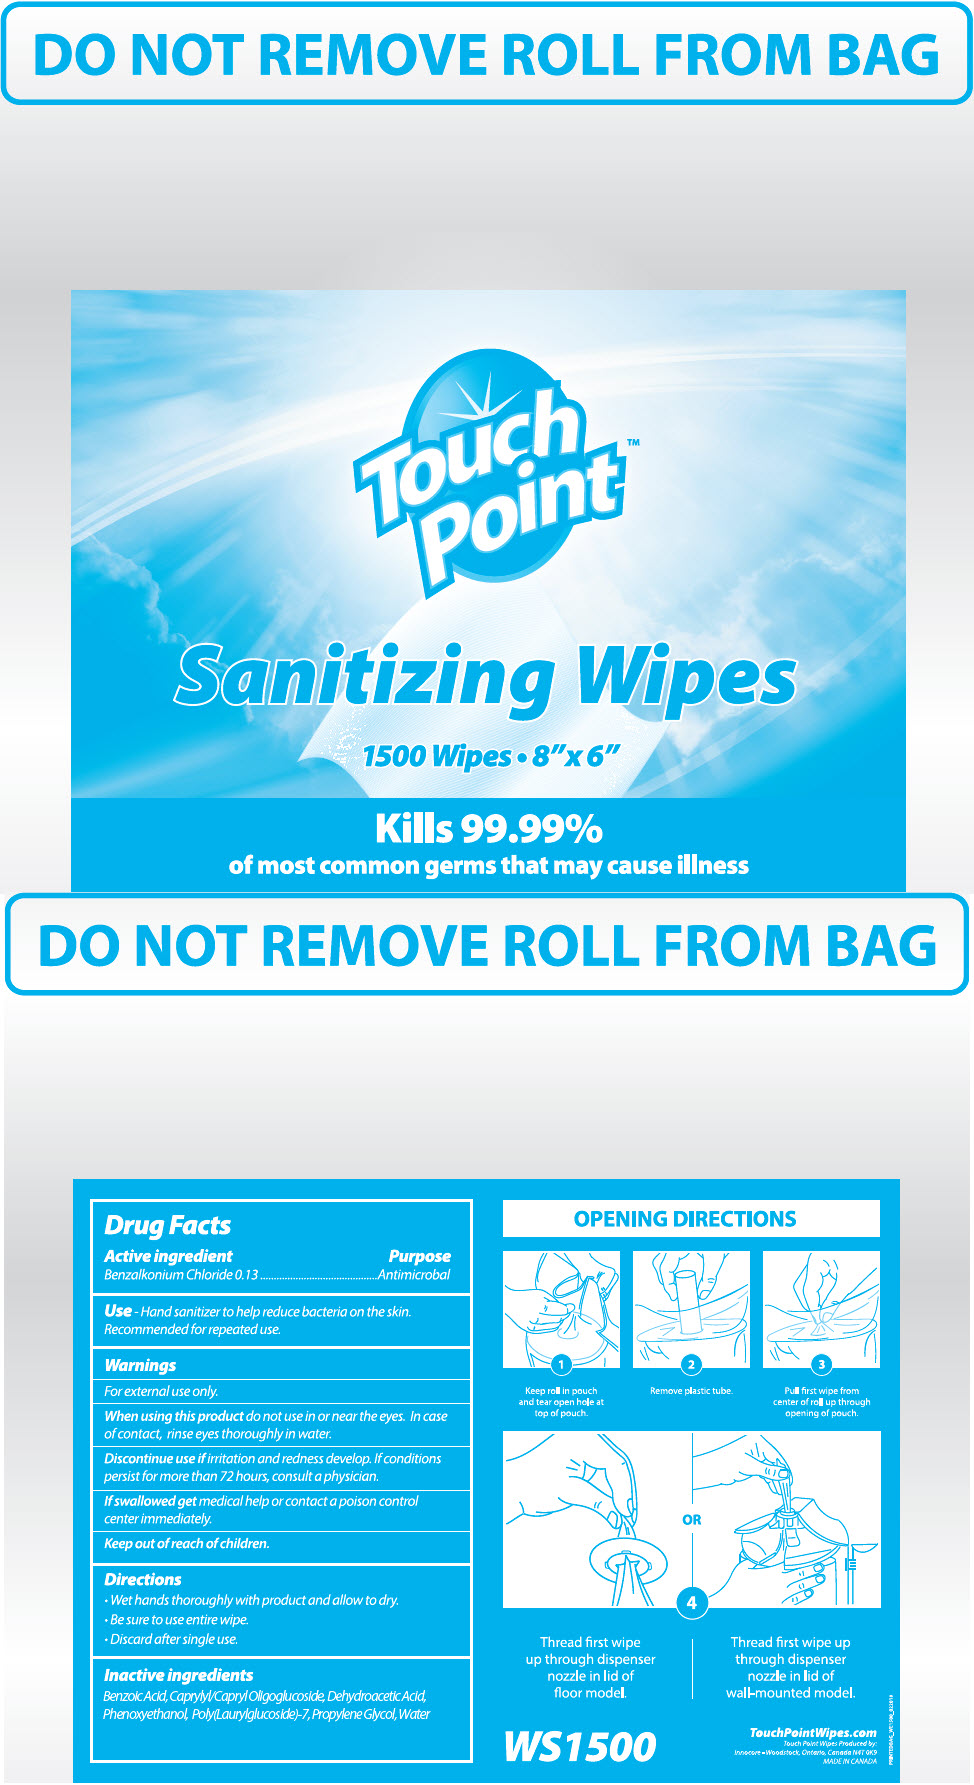 PRINCIPAL DISPLAY PANEL - 1500 Wipe Pouch Label